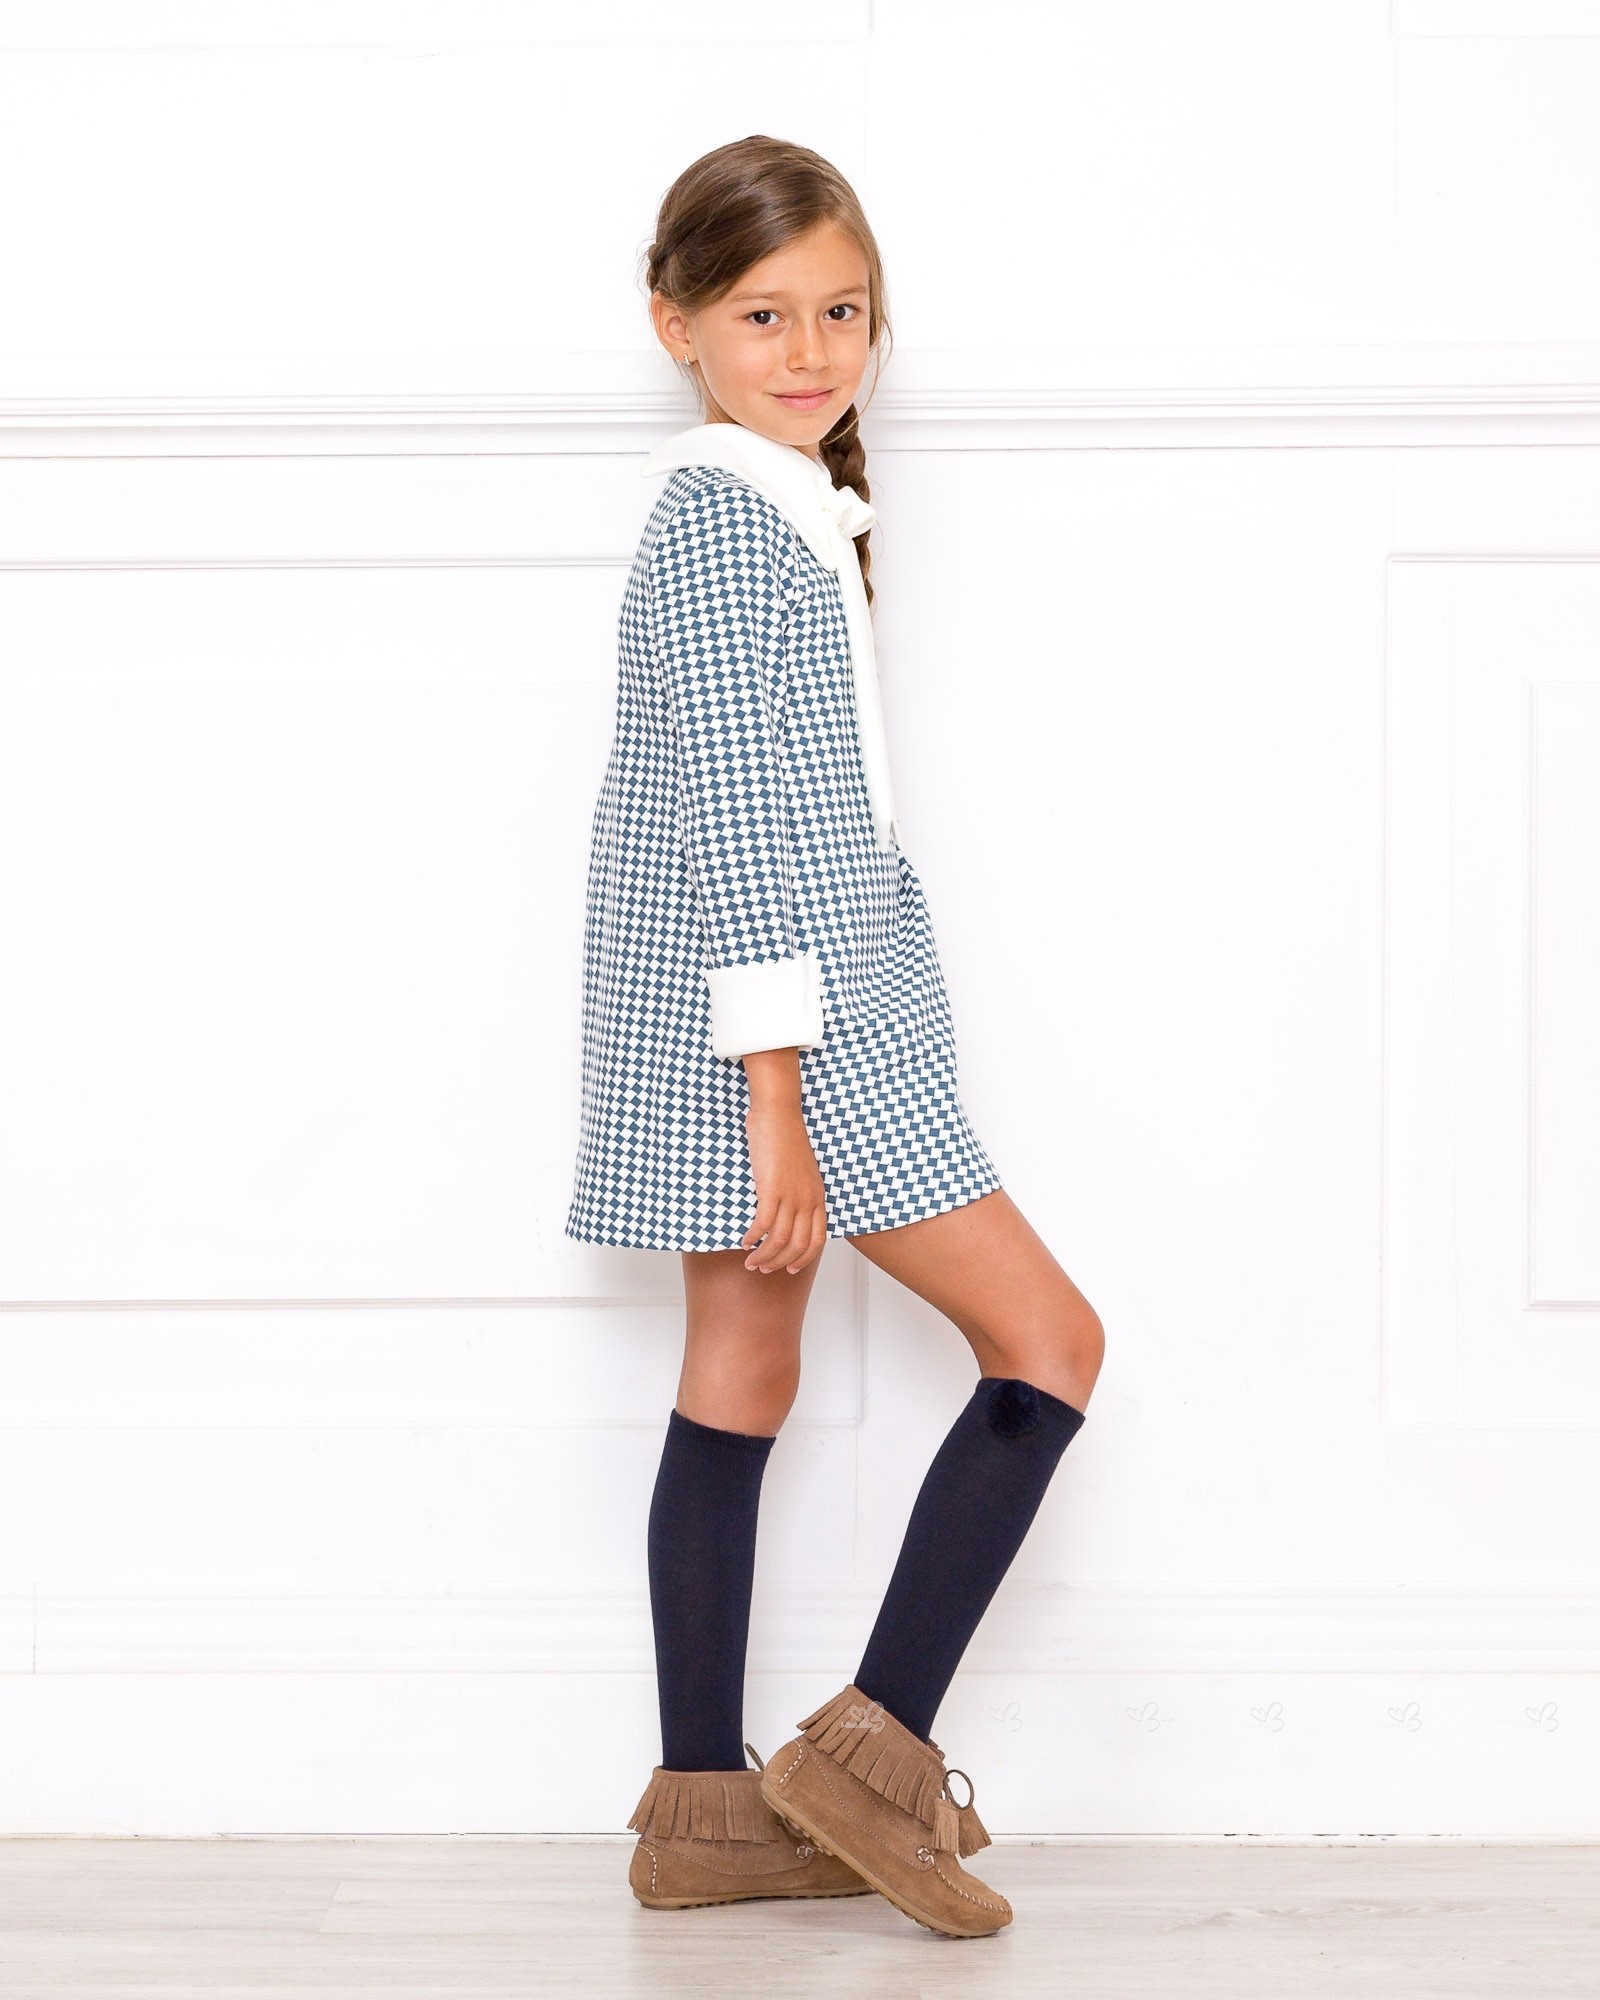 Girls Blue and White Geometric Dress & Blue Sweater Outfit | Missbaby